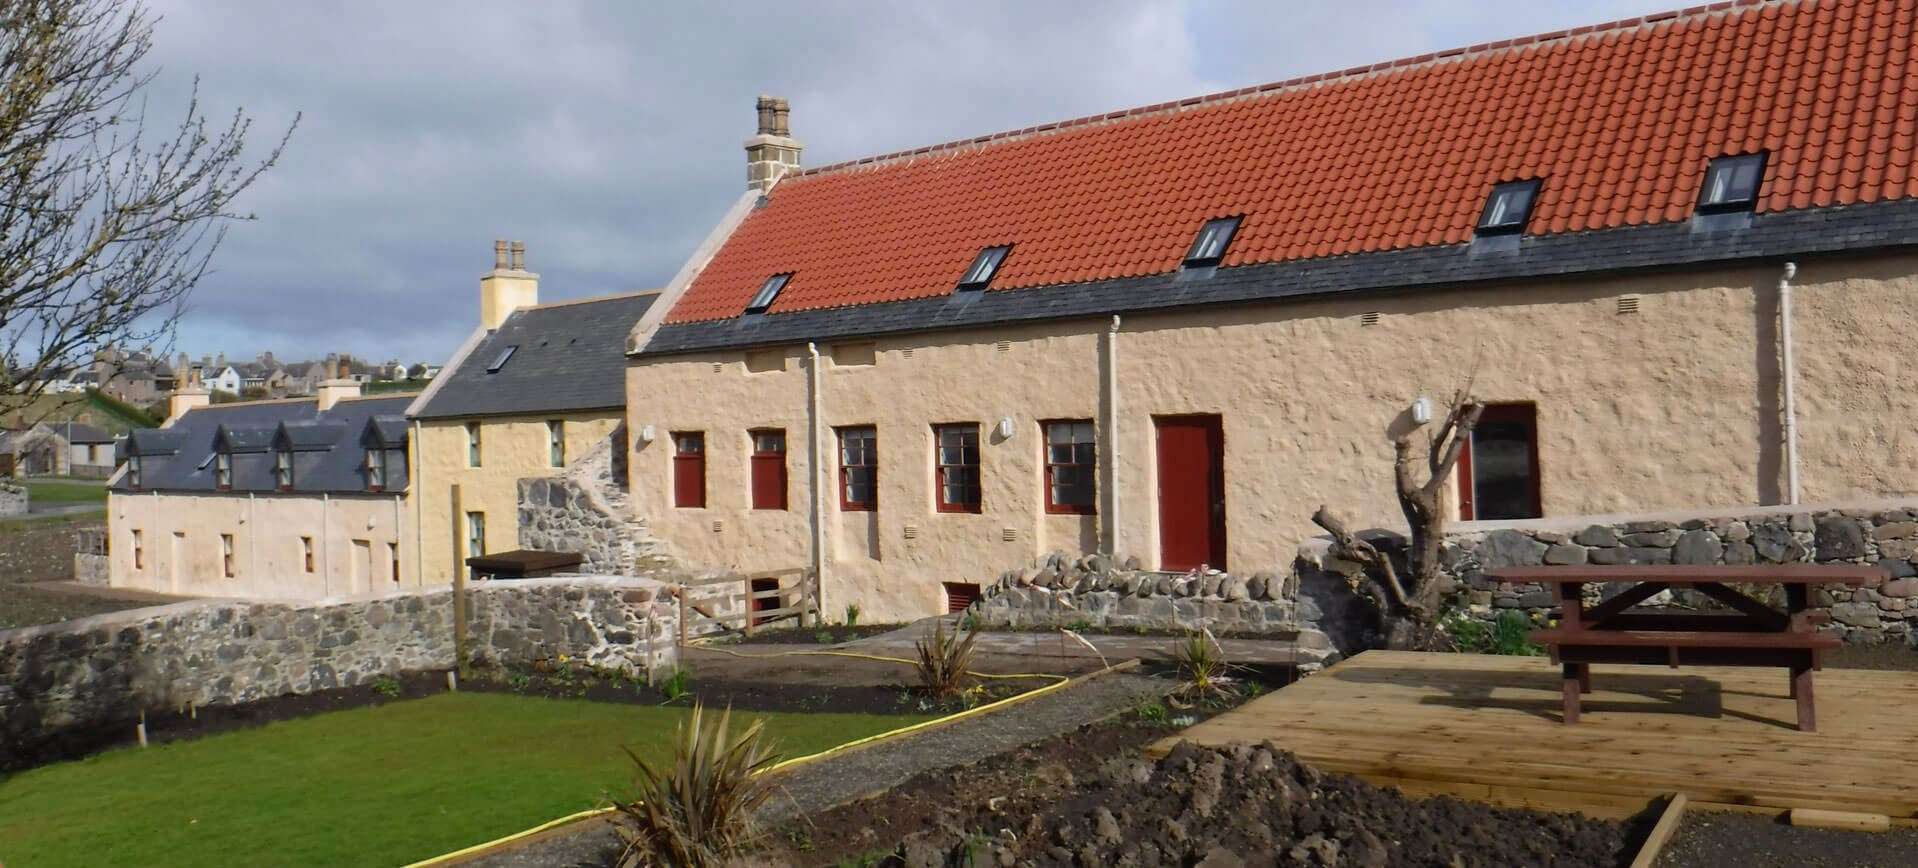 The Portsoy Sail Loft, which was turned into holiday accommodation, previously won in the design awards.